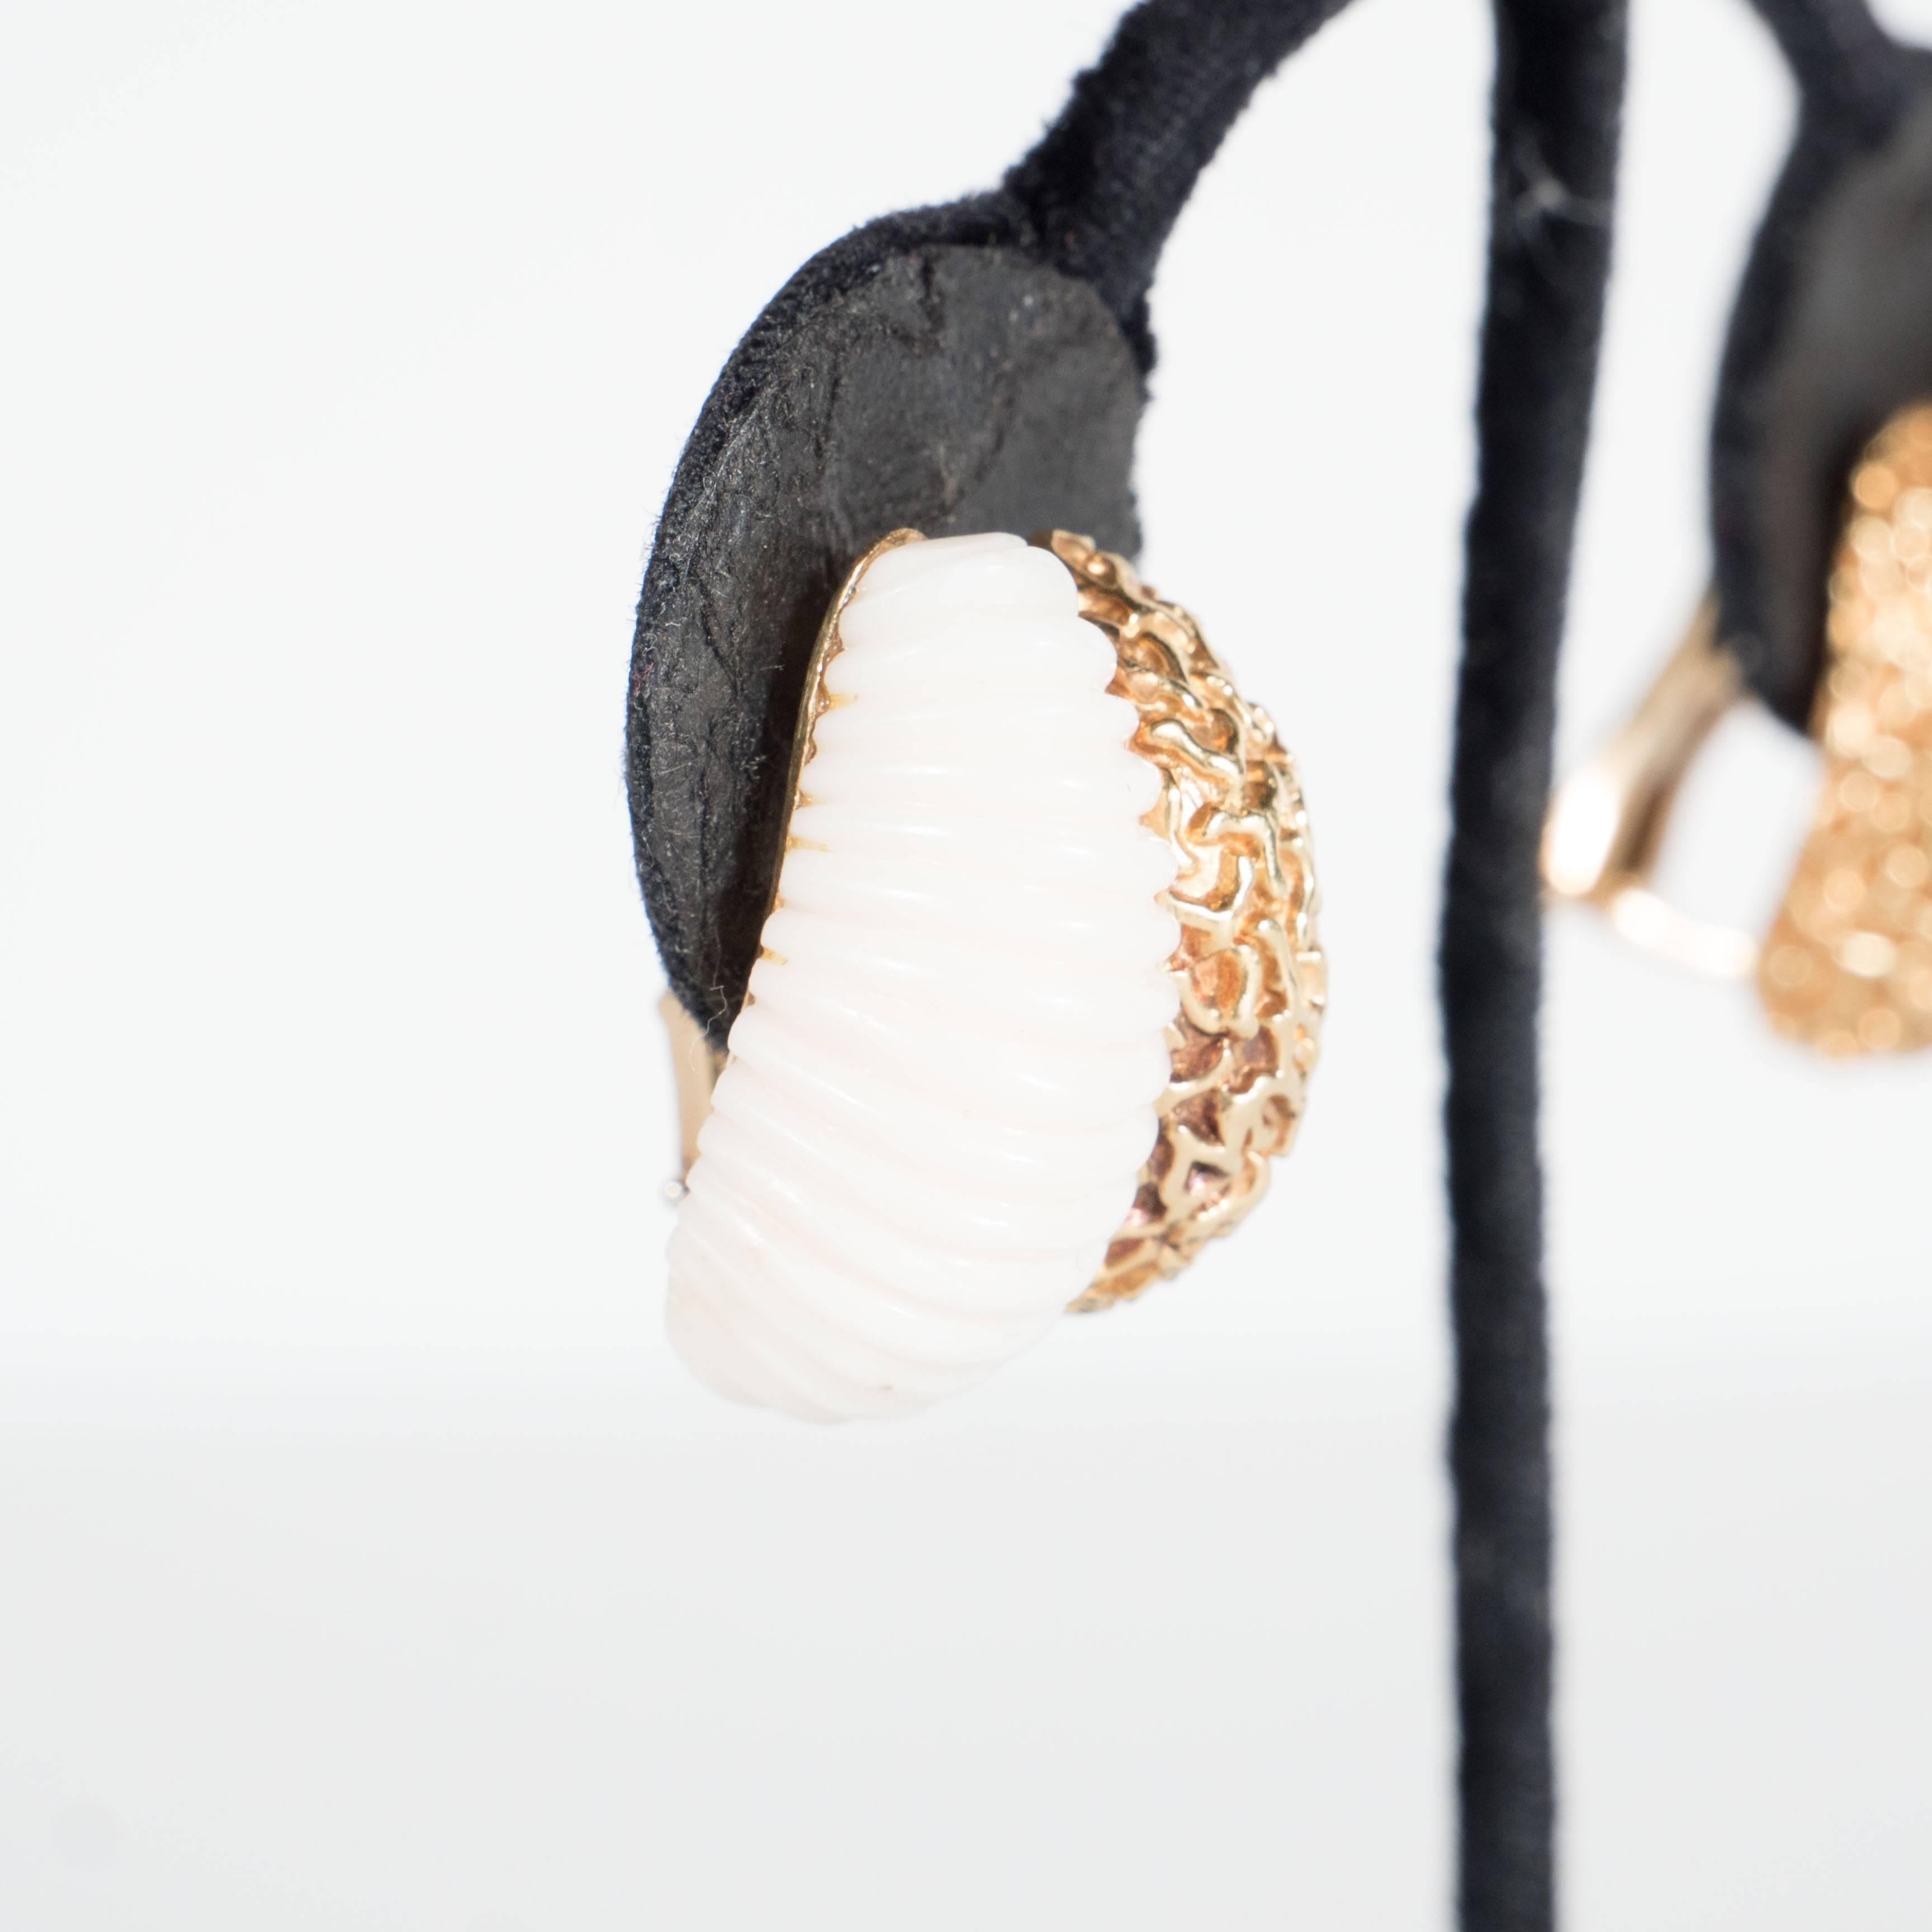 These very sophisticated pair of earrings feature a carved scrolled half hoop of white coral paired next to a textured half hoop design of 18k yellow gold with a design mimicking natural coral.They are in excellent condition.